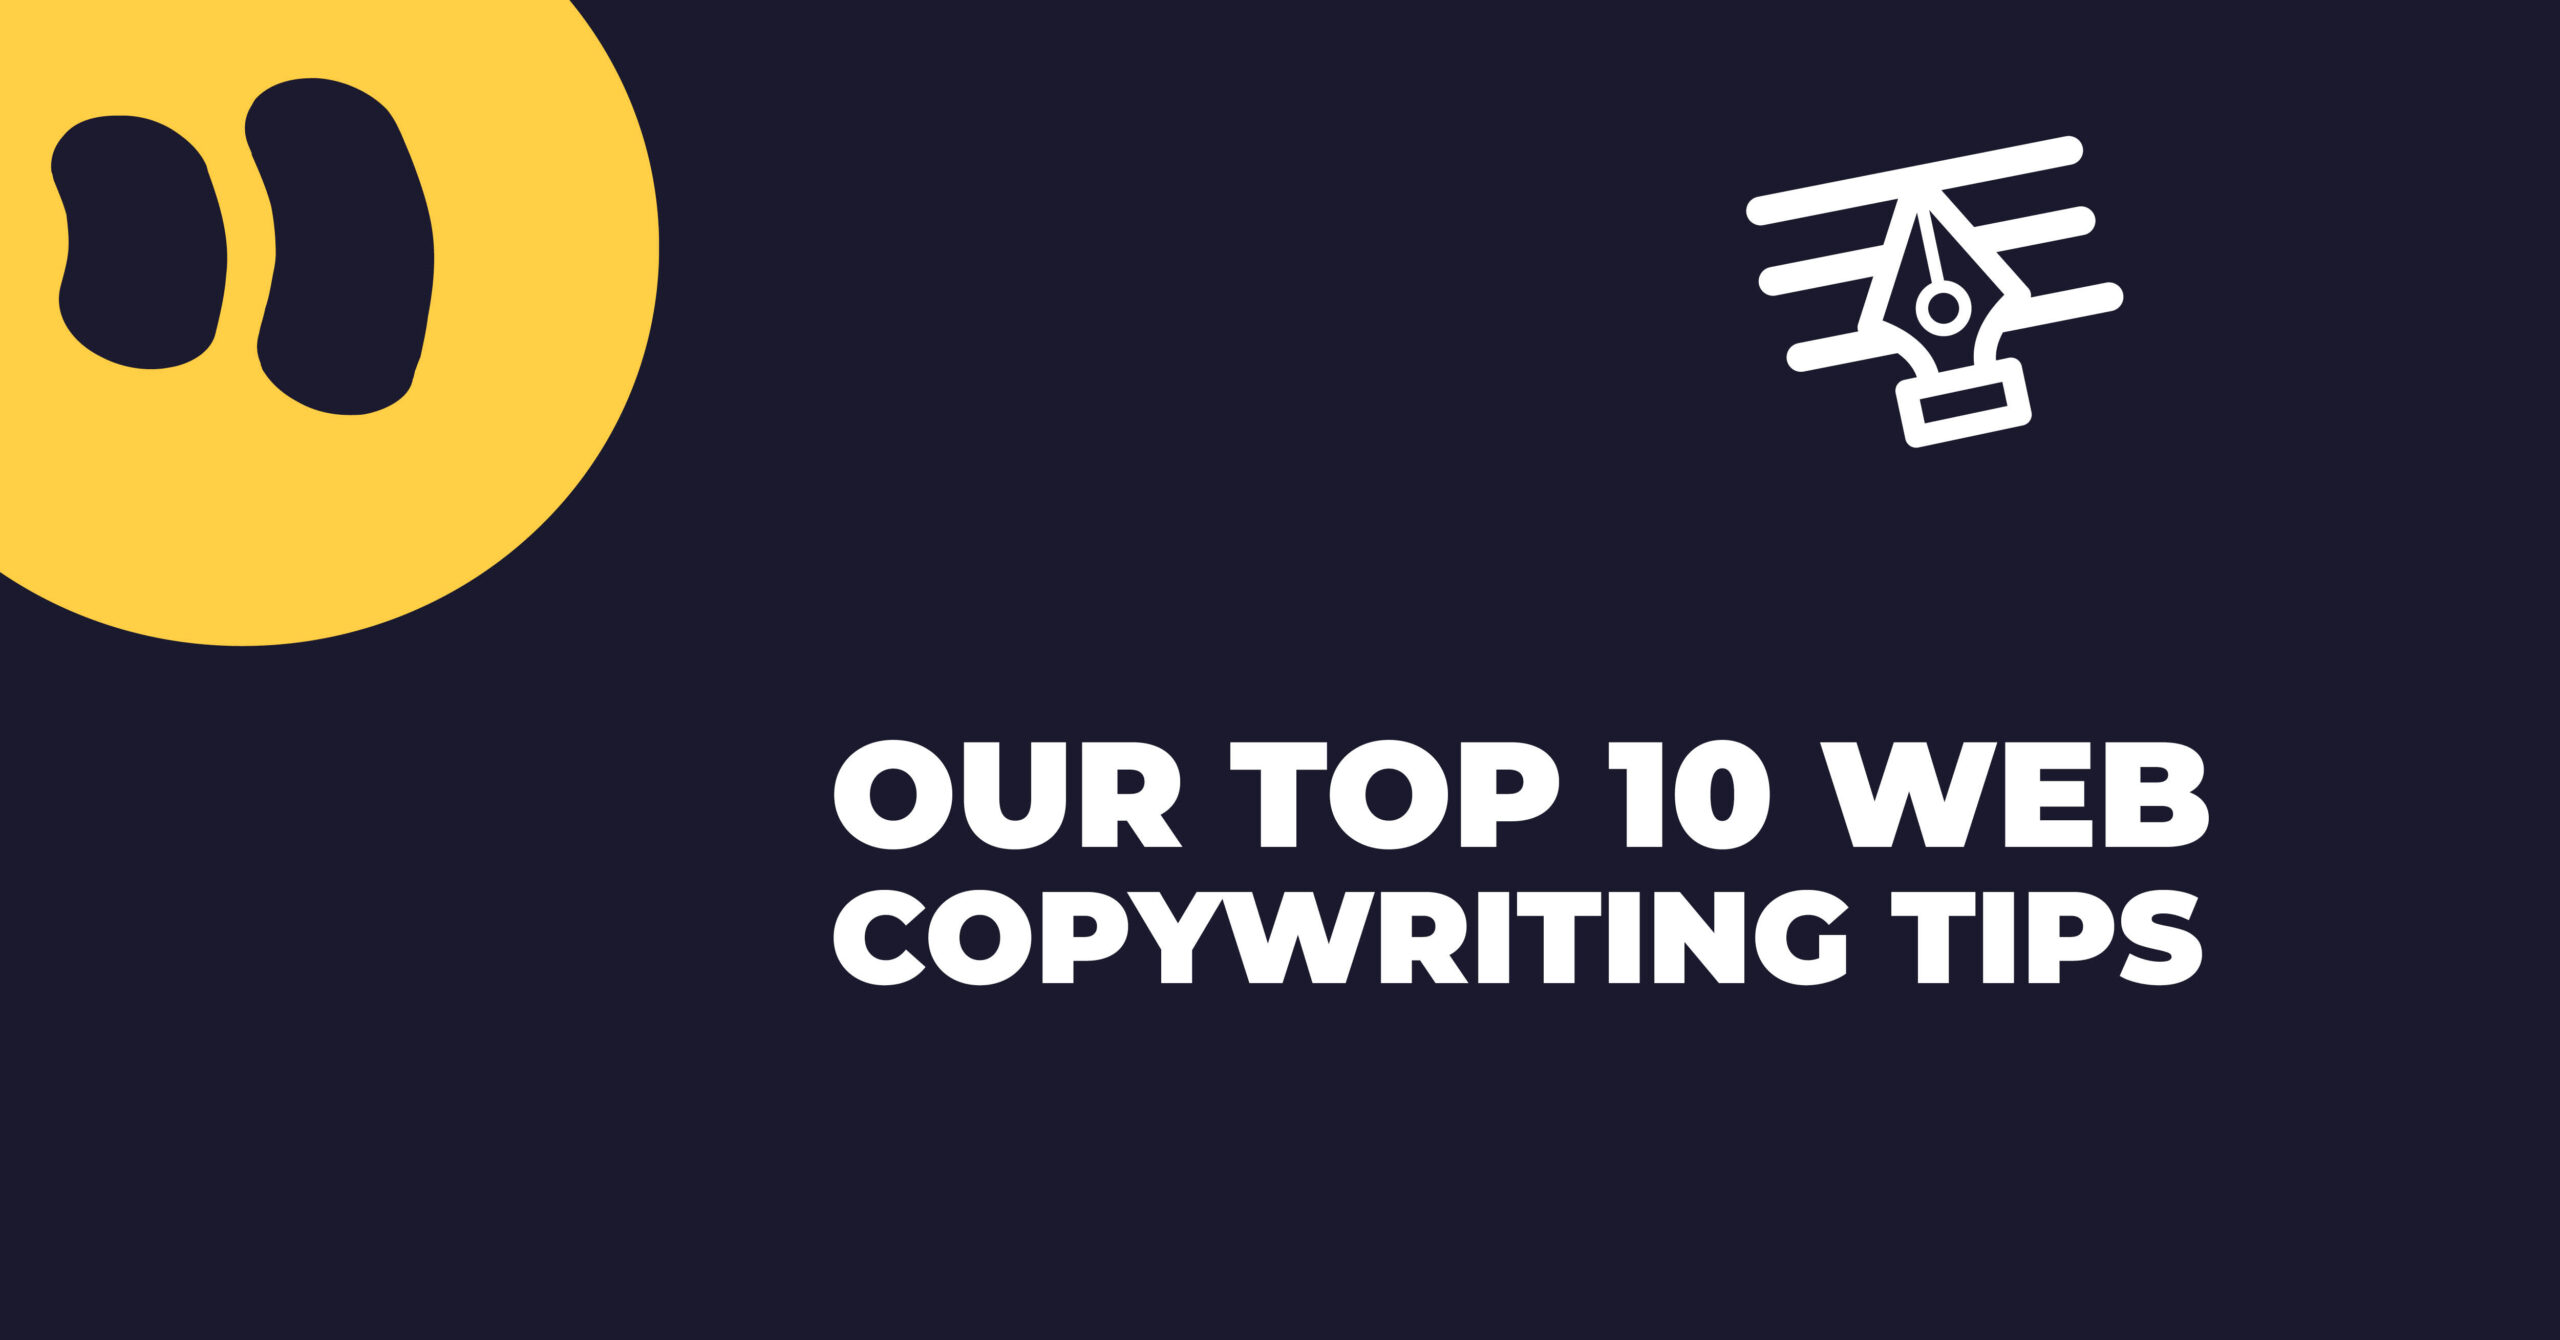 10 web copywriting tips from experts